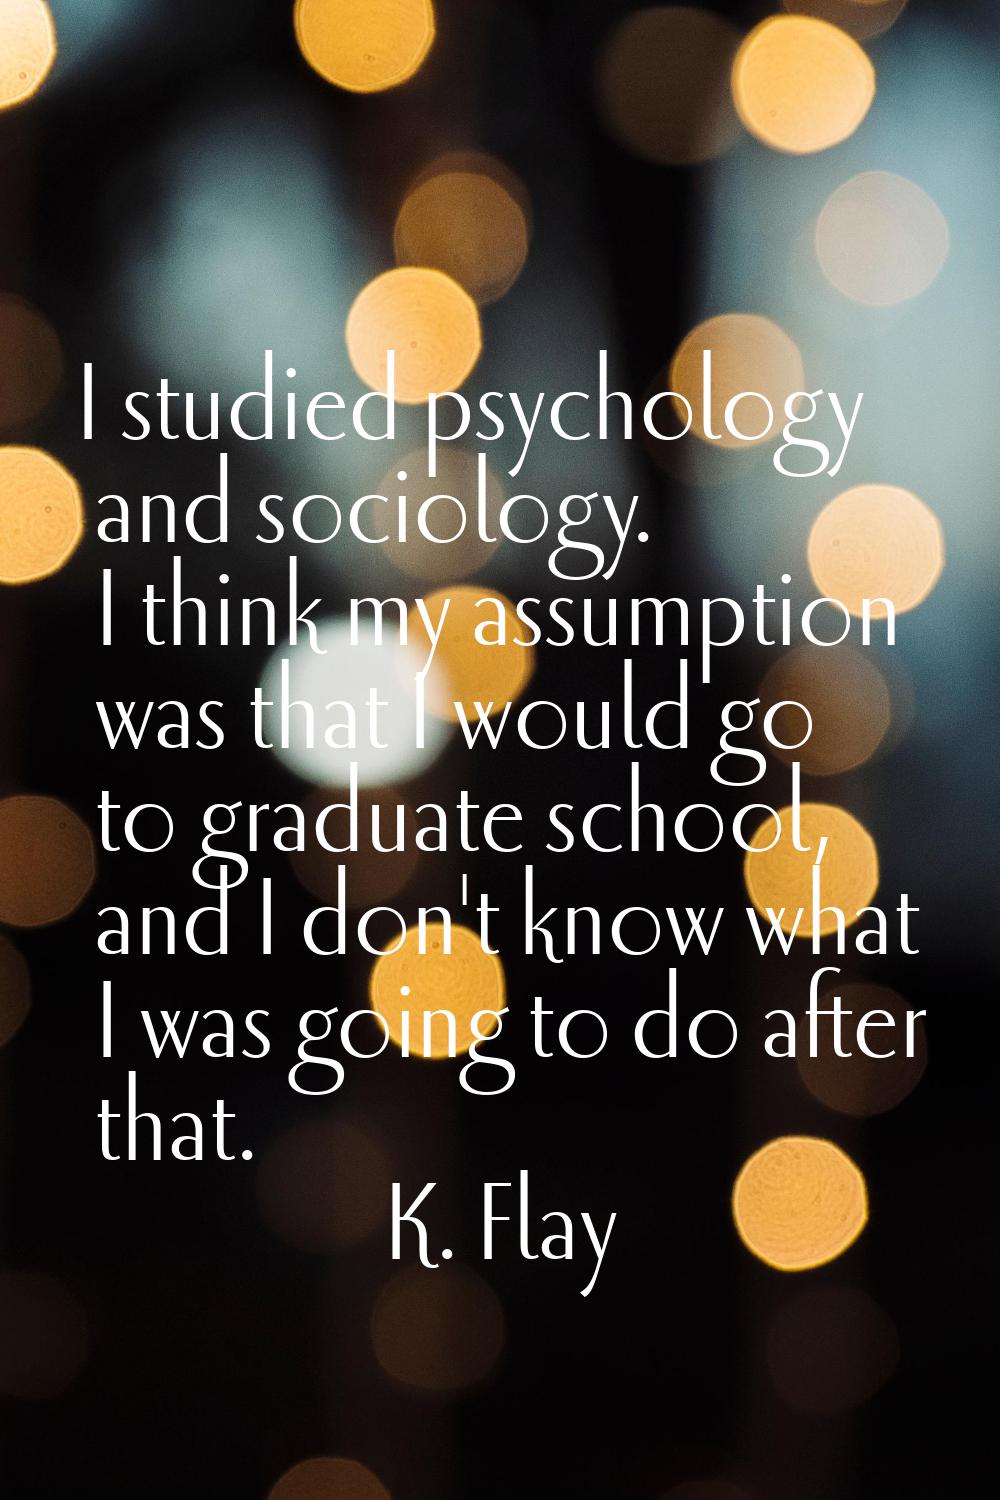 I studied psychology and sociology. I think my assumption was that I would go to graduate school, a